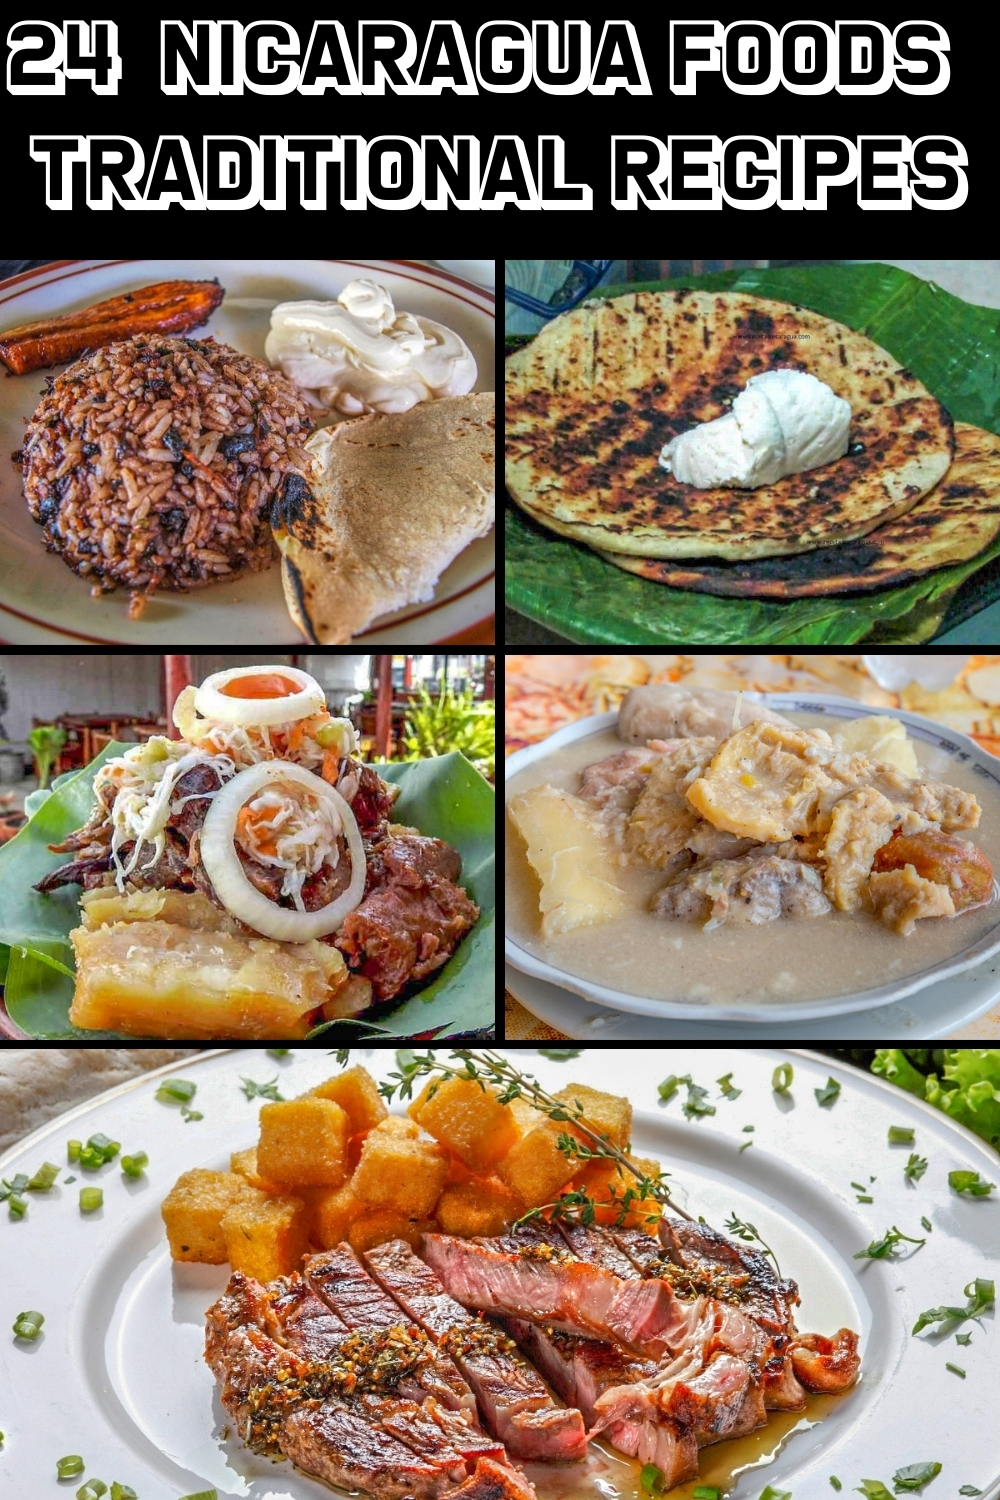 24 Nicaragua Foods & Easy Recipes for Nicaragua Dishes (3)